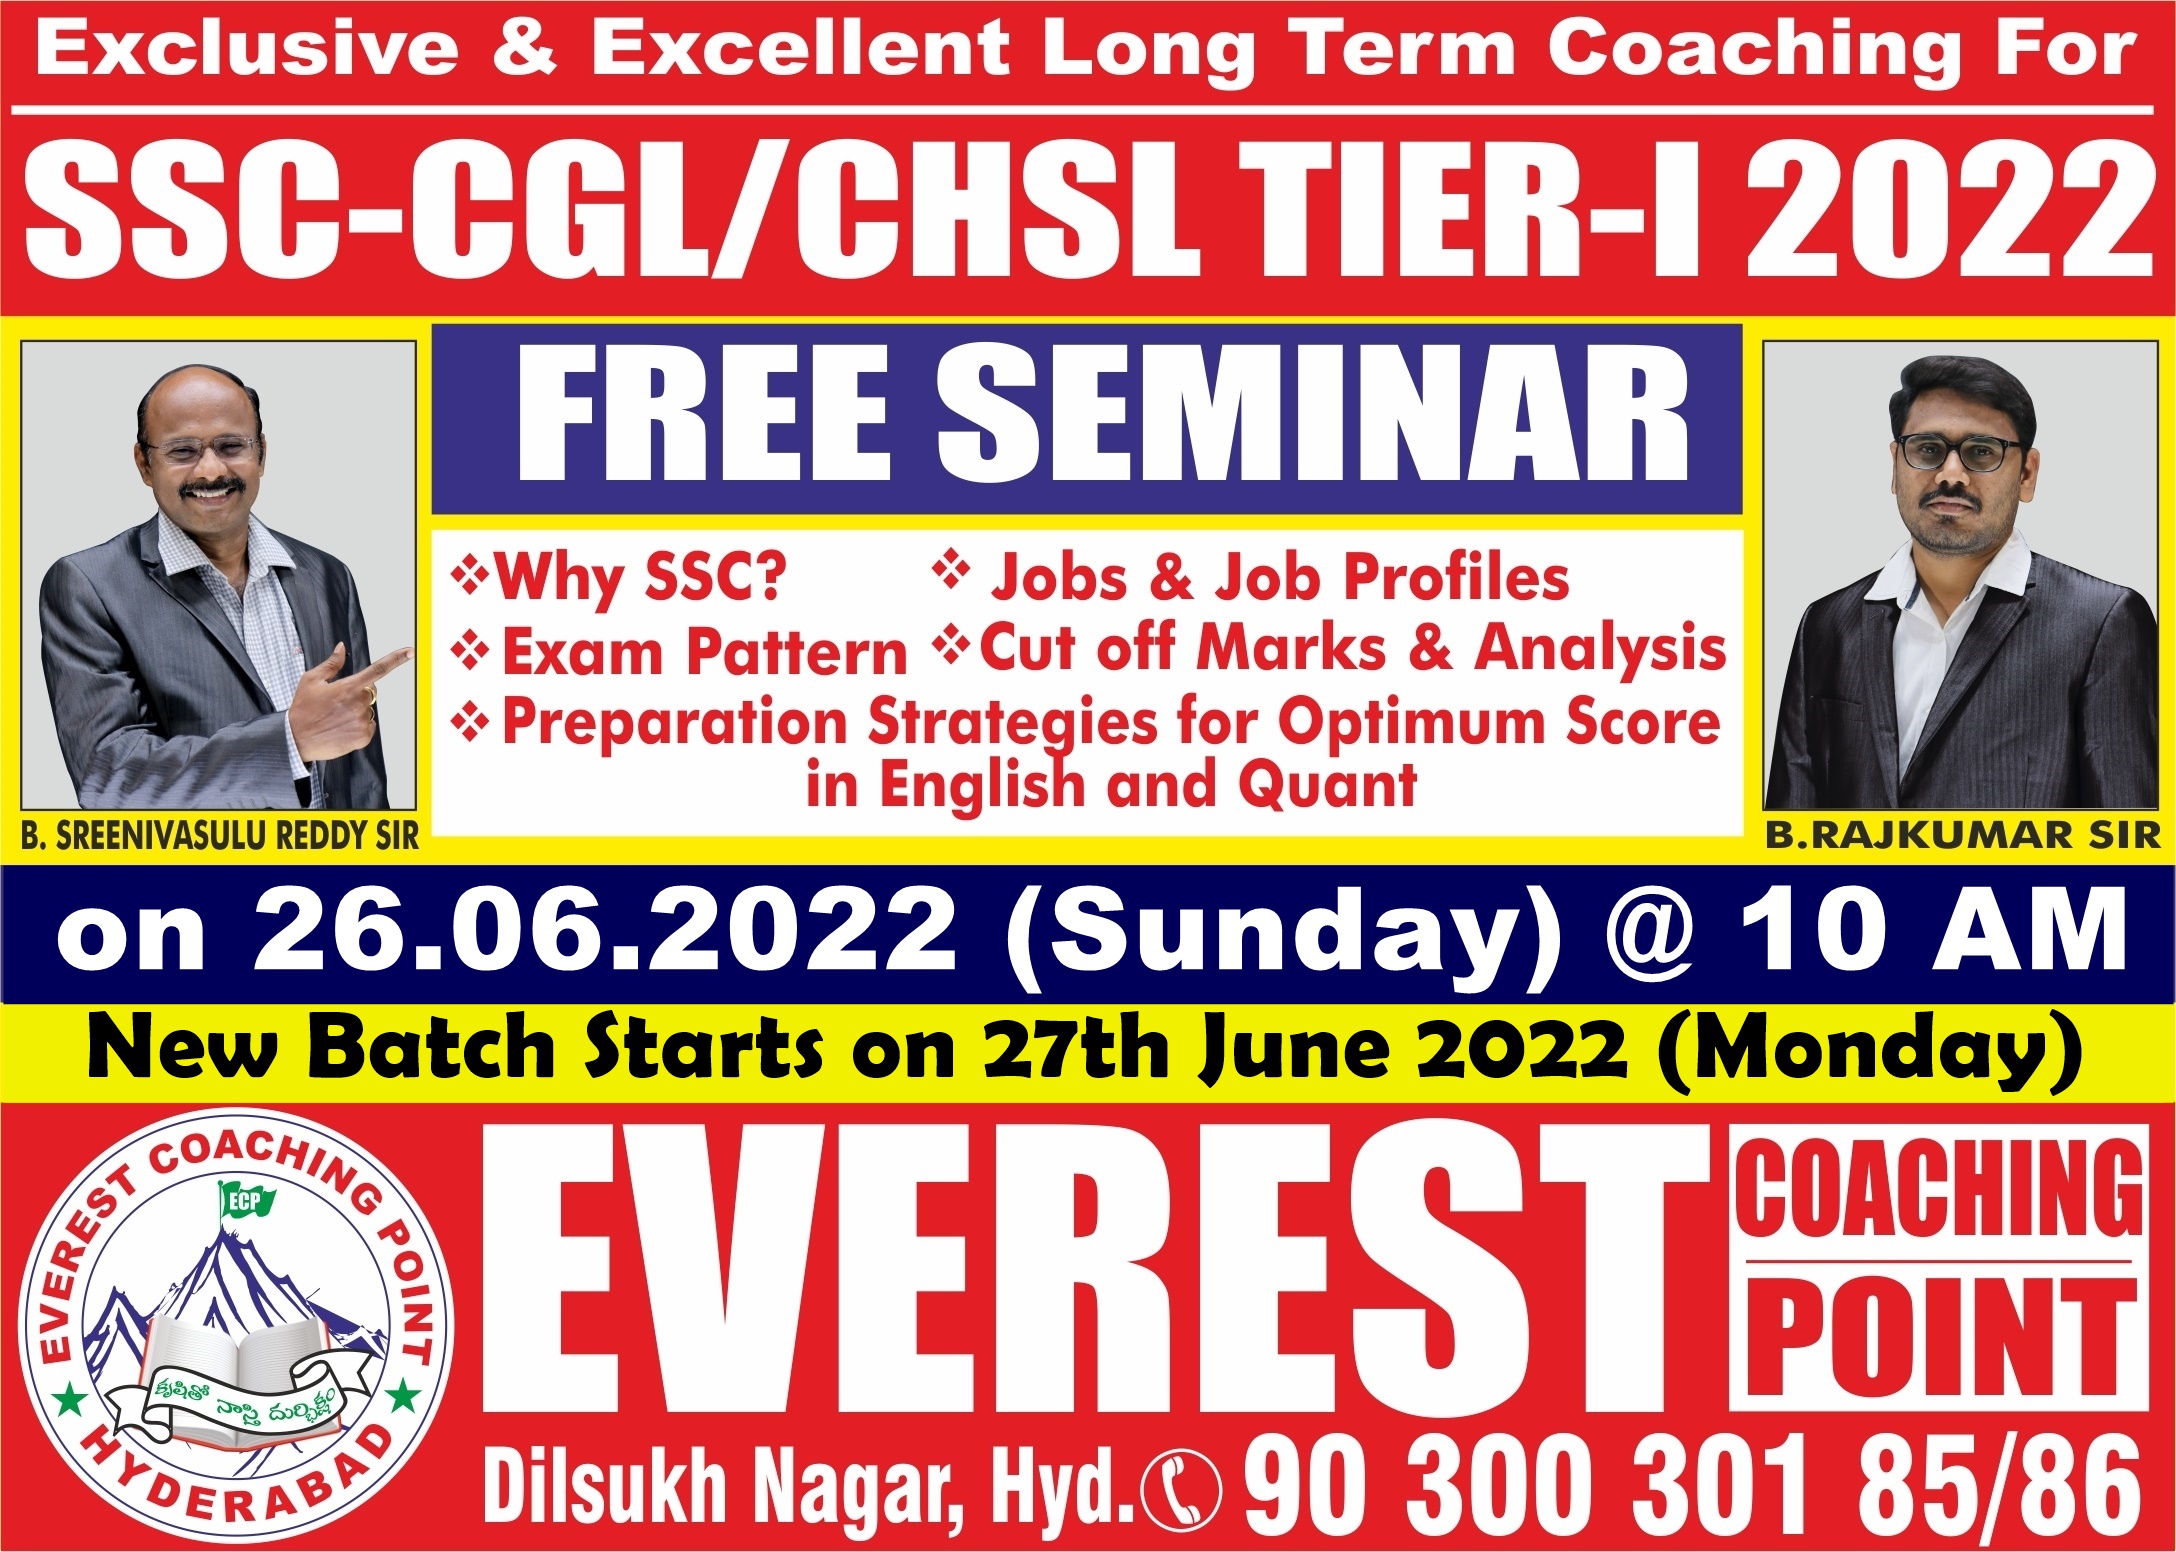 ssc cgl coaching centers in hyderabad